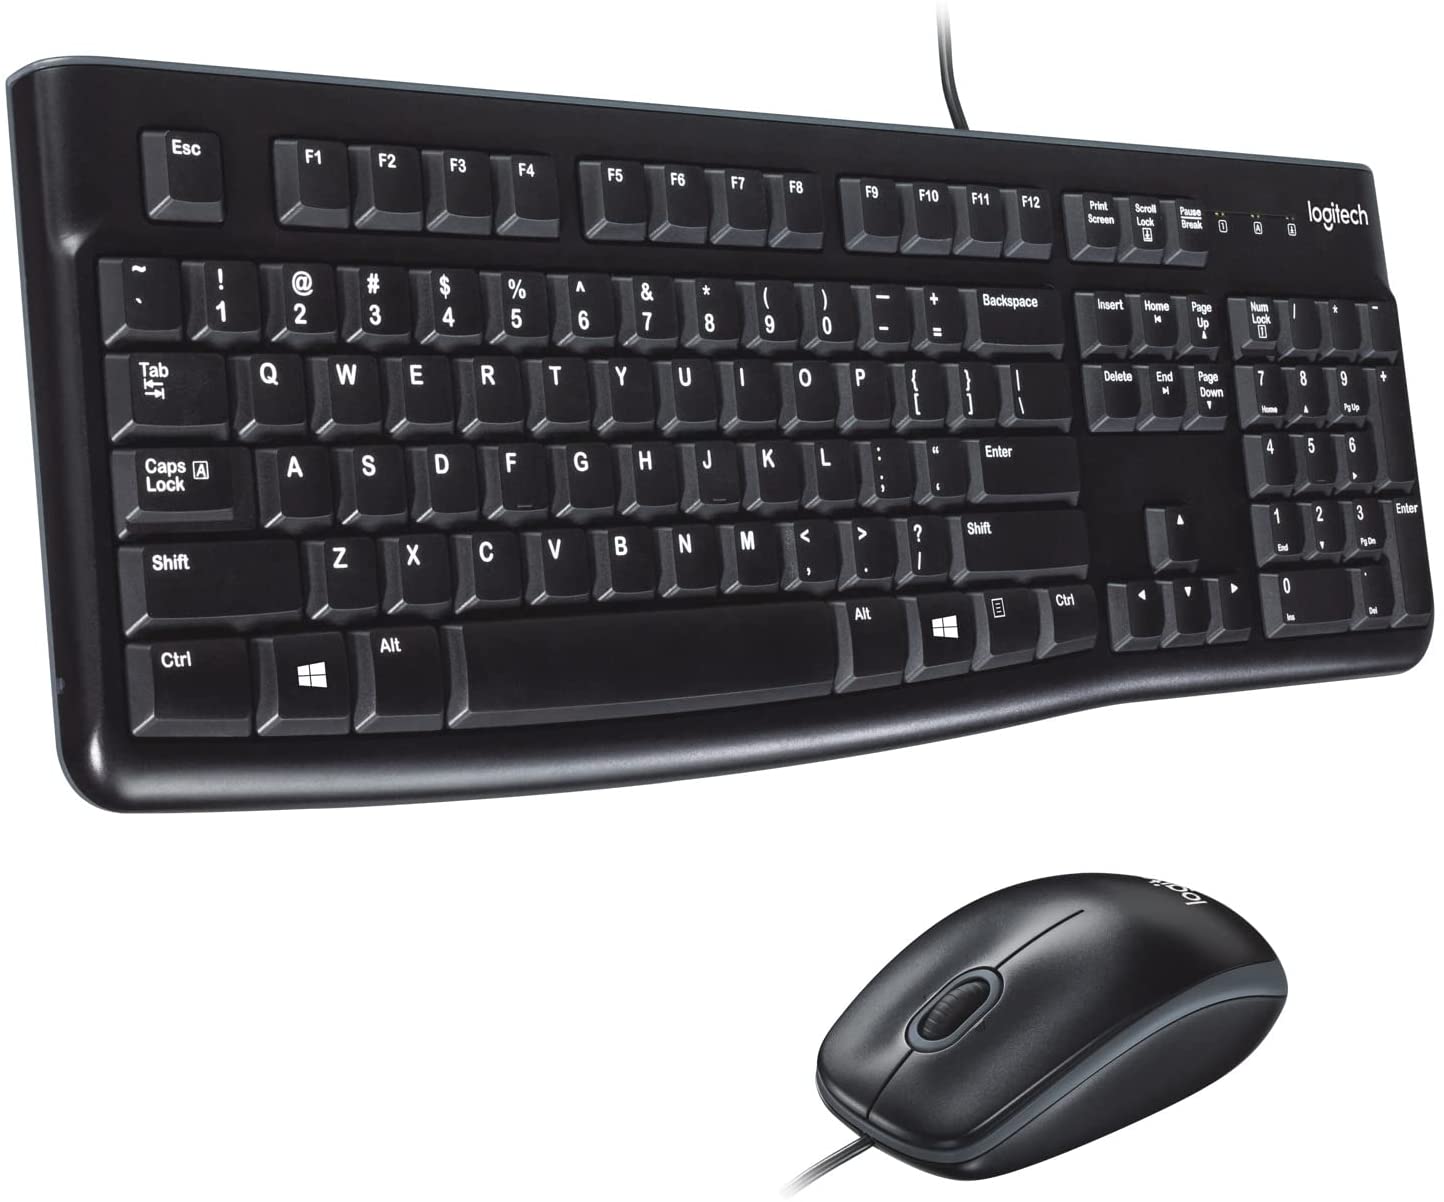 Logitech MK120 Wired Keyboard and Mouse Combo for Windows, Optical Wired Mouse, Full-Size Keyboard, USB Plug-and-Play